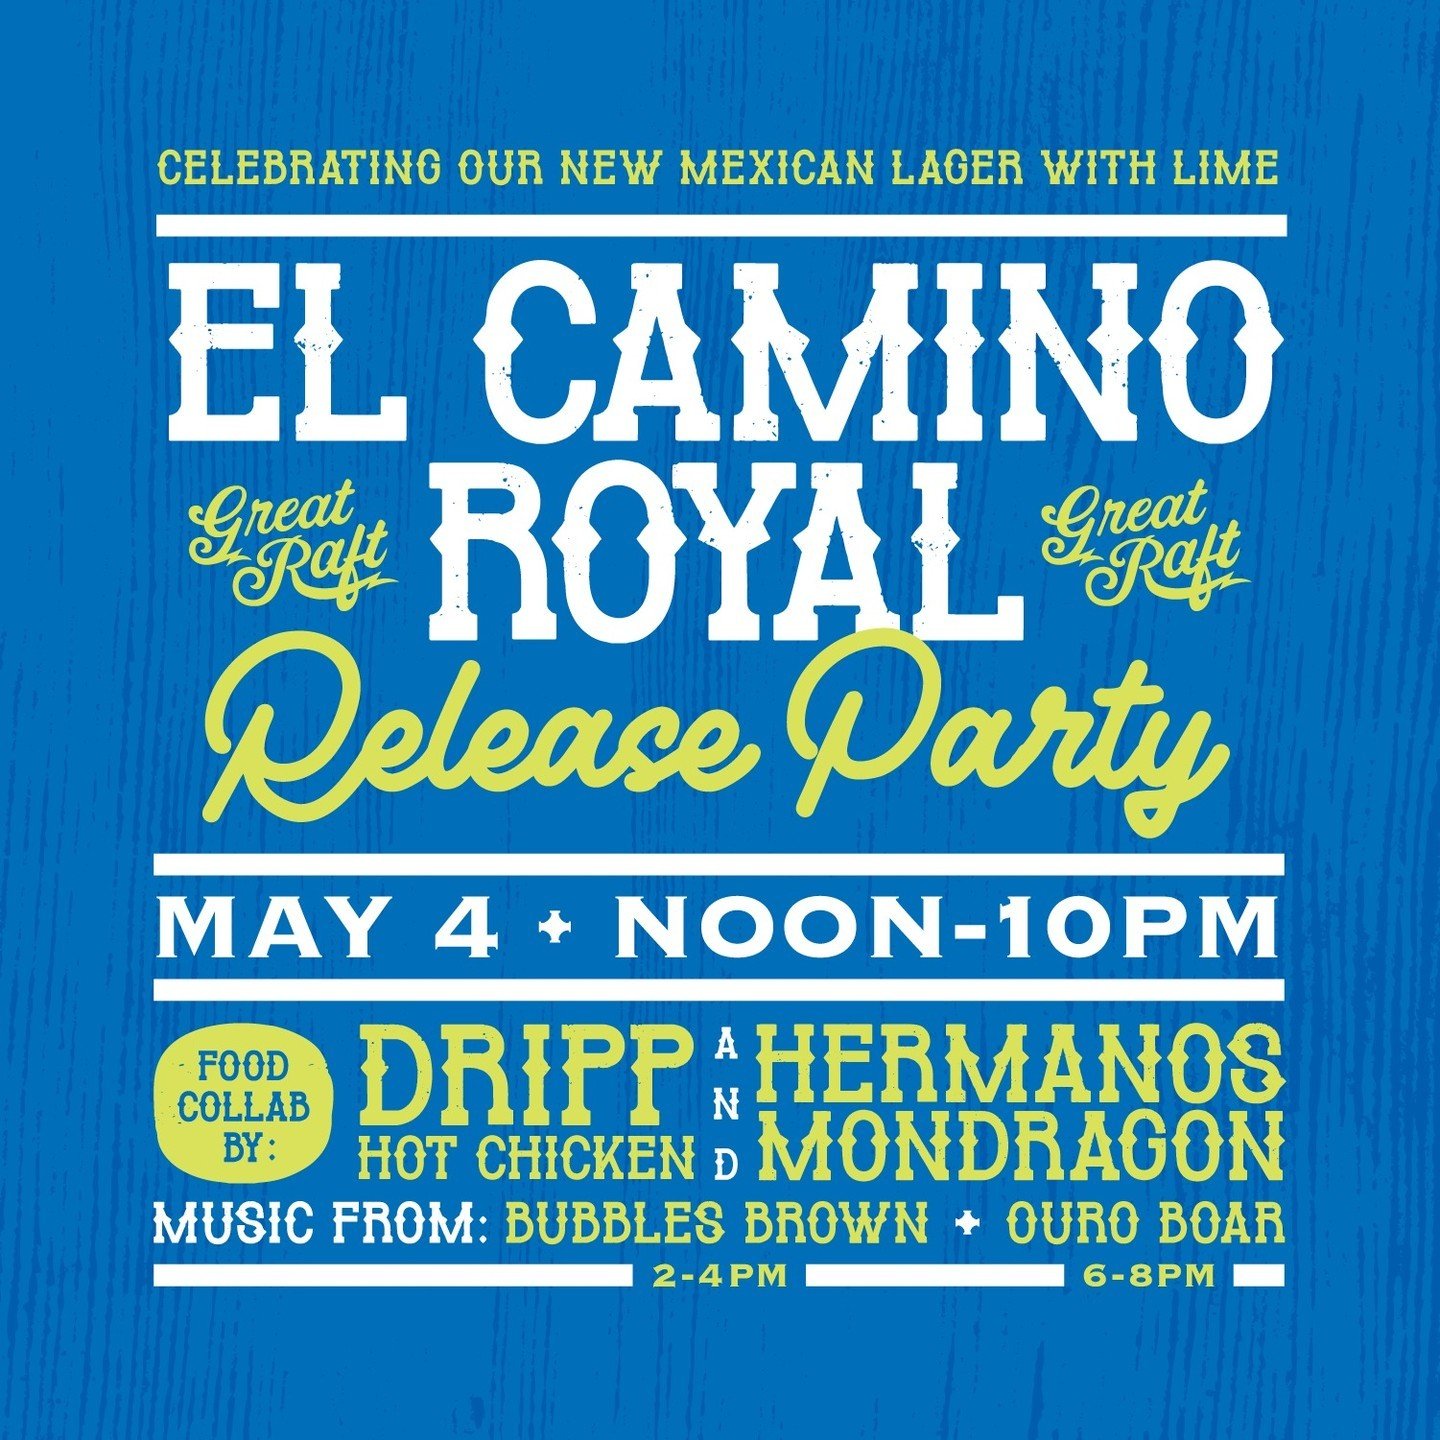 Join us Saturday, May 4 for the release of our first-ever Mexican Lager! This is the ultimate celebration of cold, crisp beer...delicious food...and fun music. 

We'll have our newest release - El Camino Royal - Mexican Lager with Lime on tap, along 